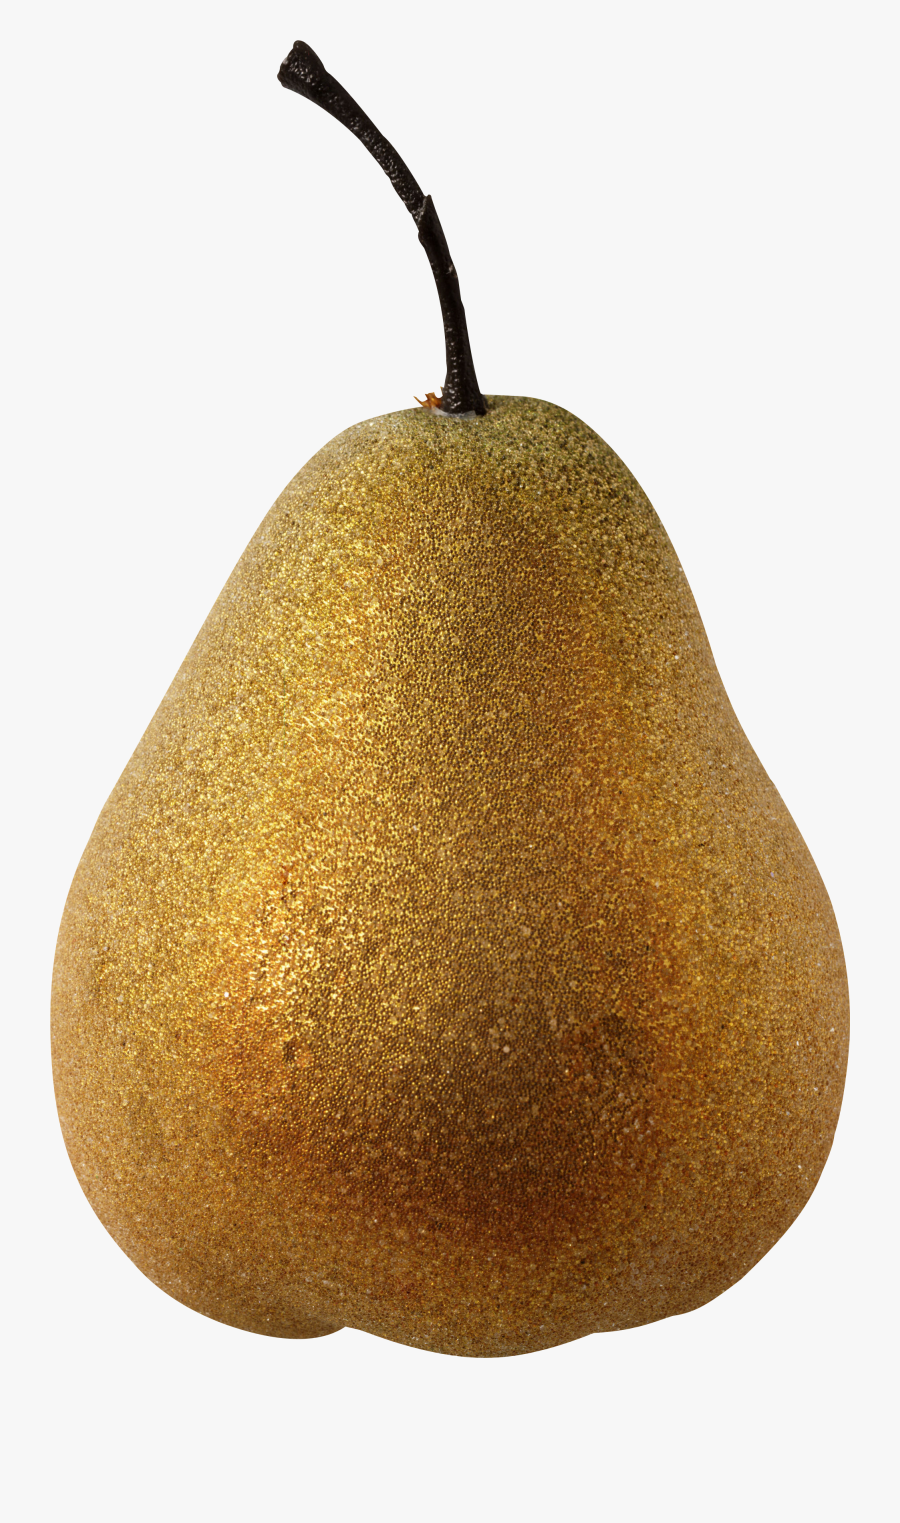 Ripe Pear Png Image - Asian Pear Fruit Png, Transparent Clipart